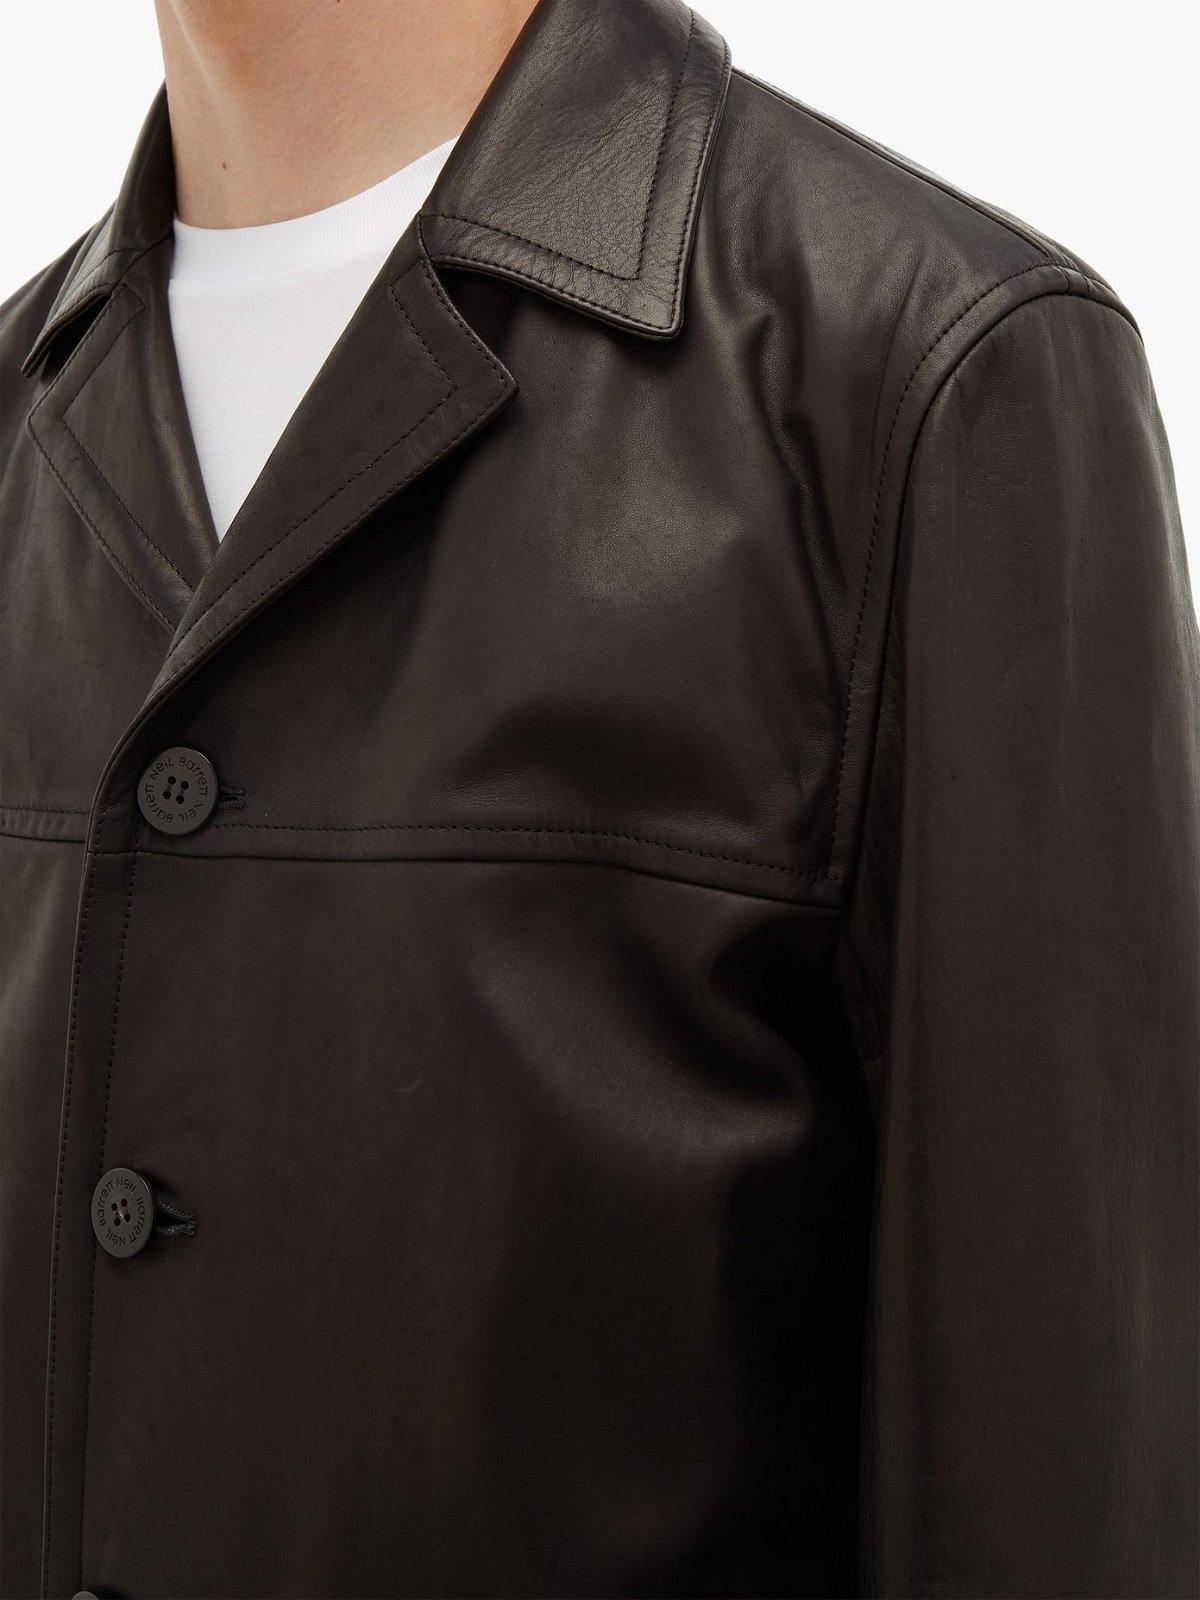 Men Brown Long Leather Jacket - Wiseleather